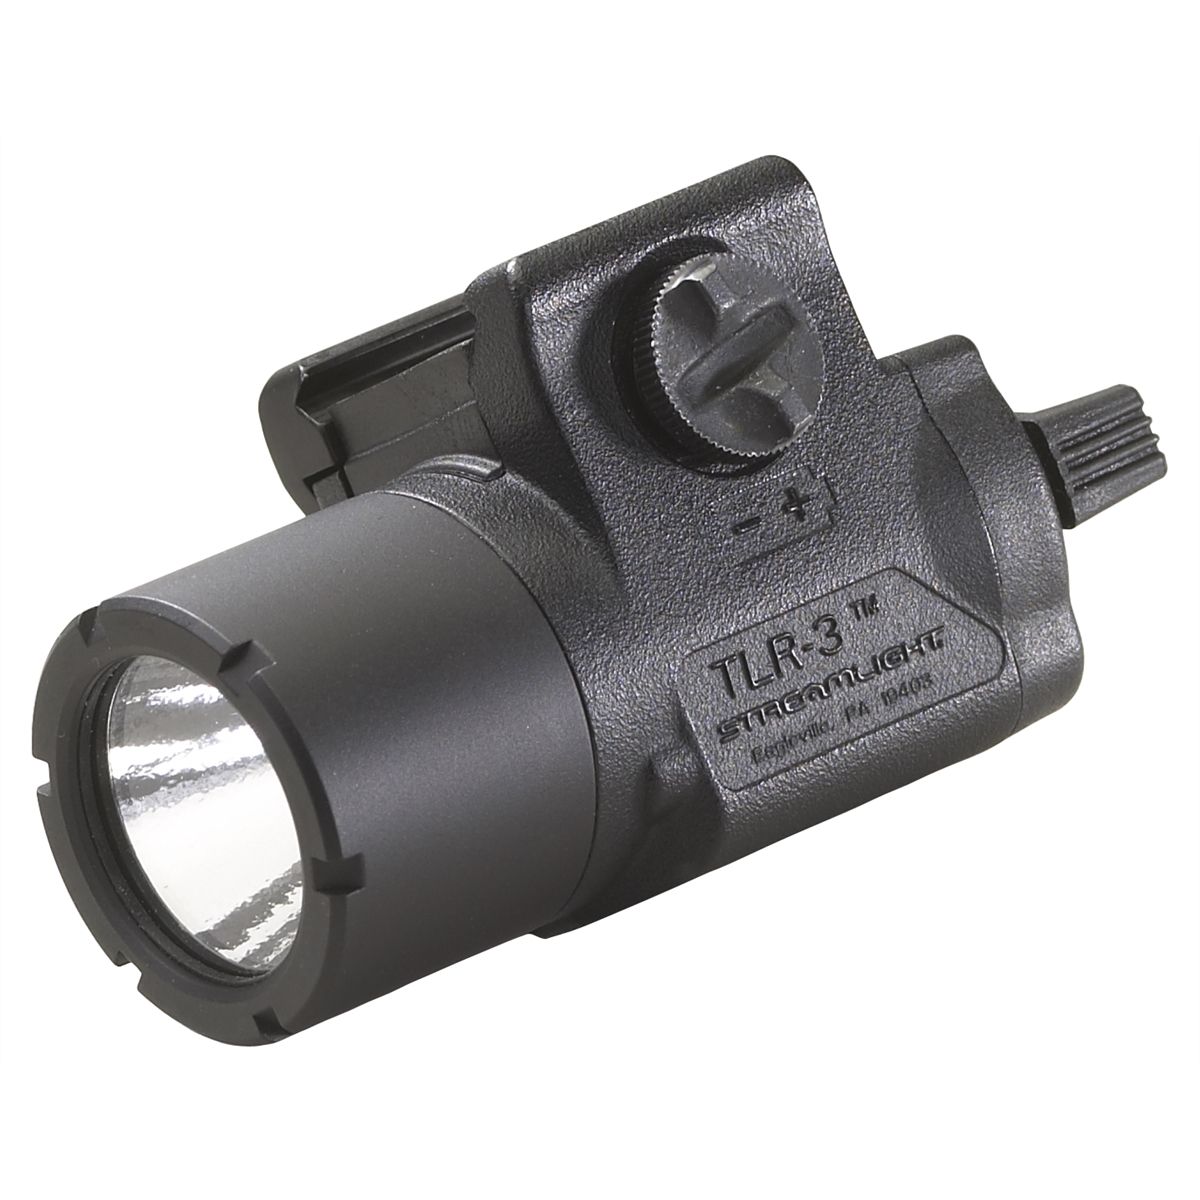 TLR-3 Compact Rail Mounted Tactical Light